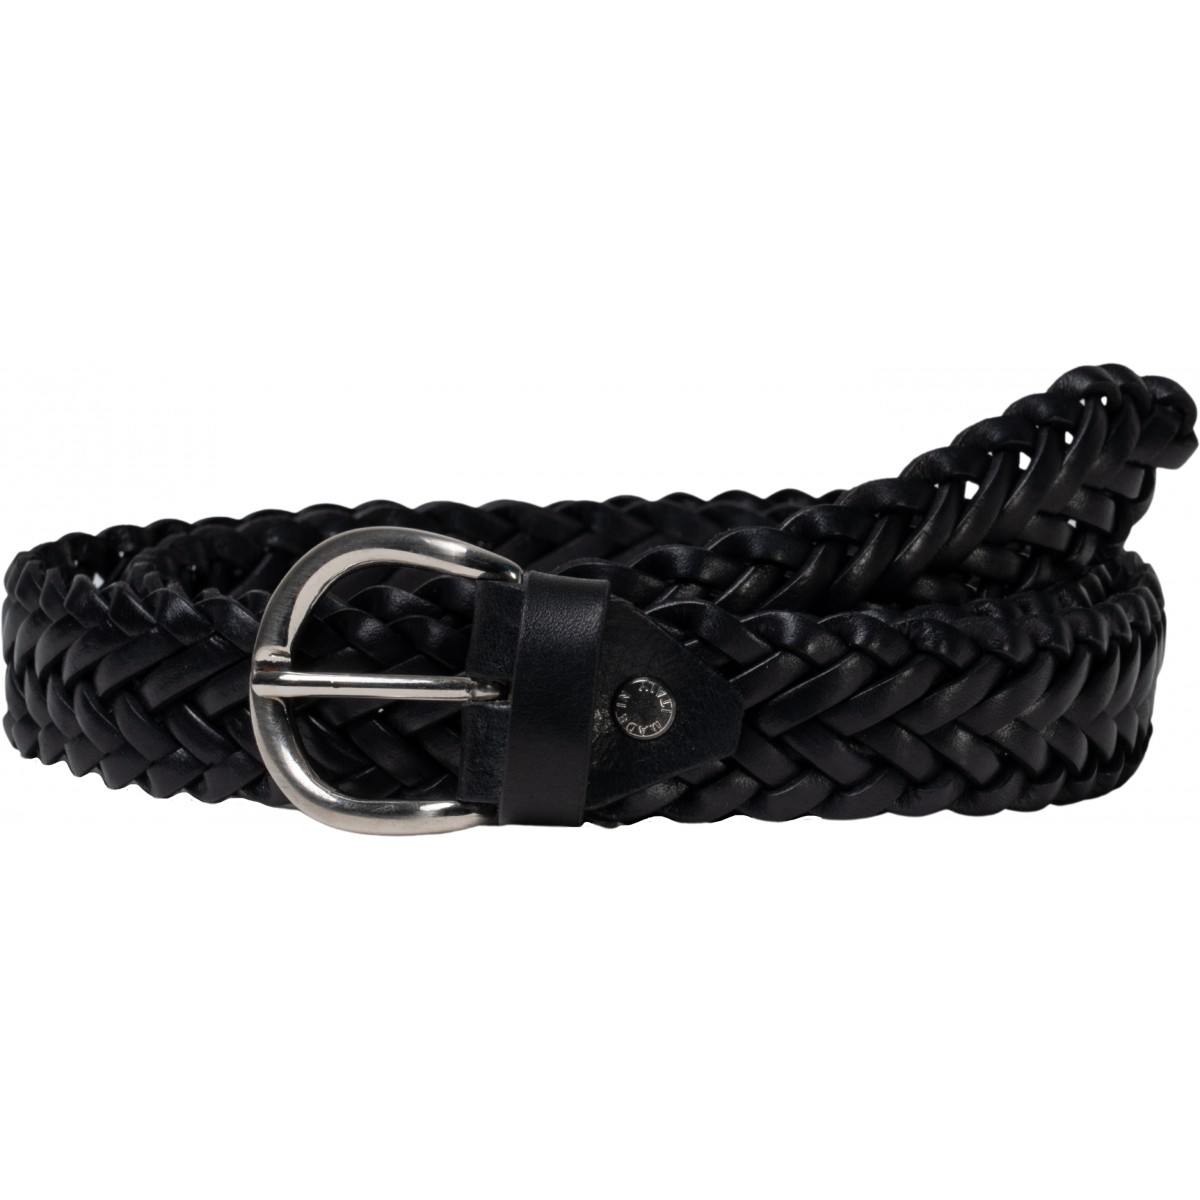 white hand-braided leather strap